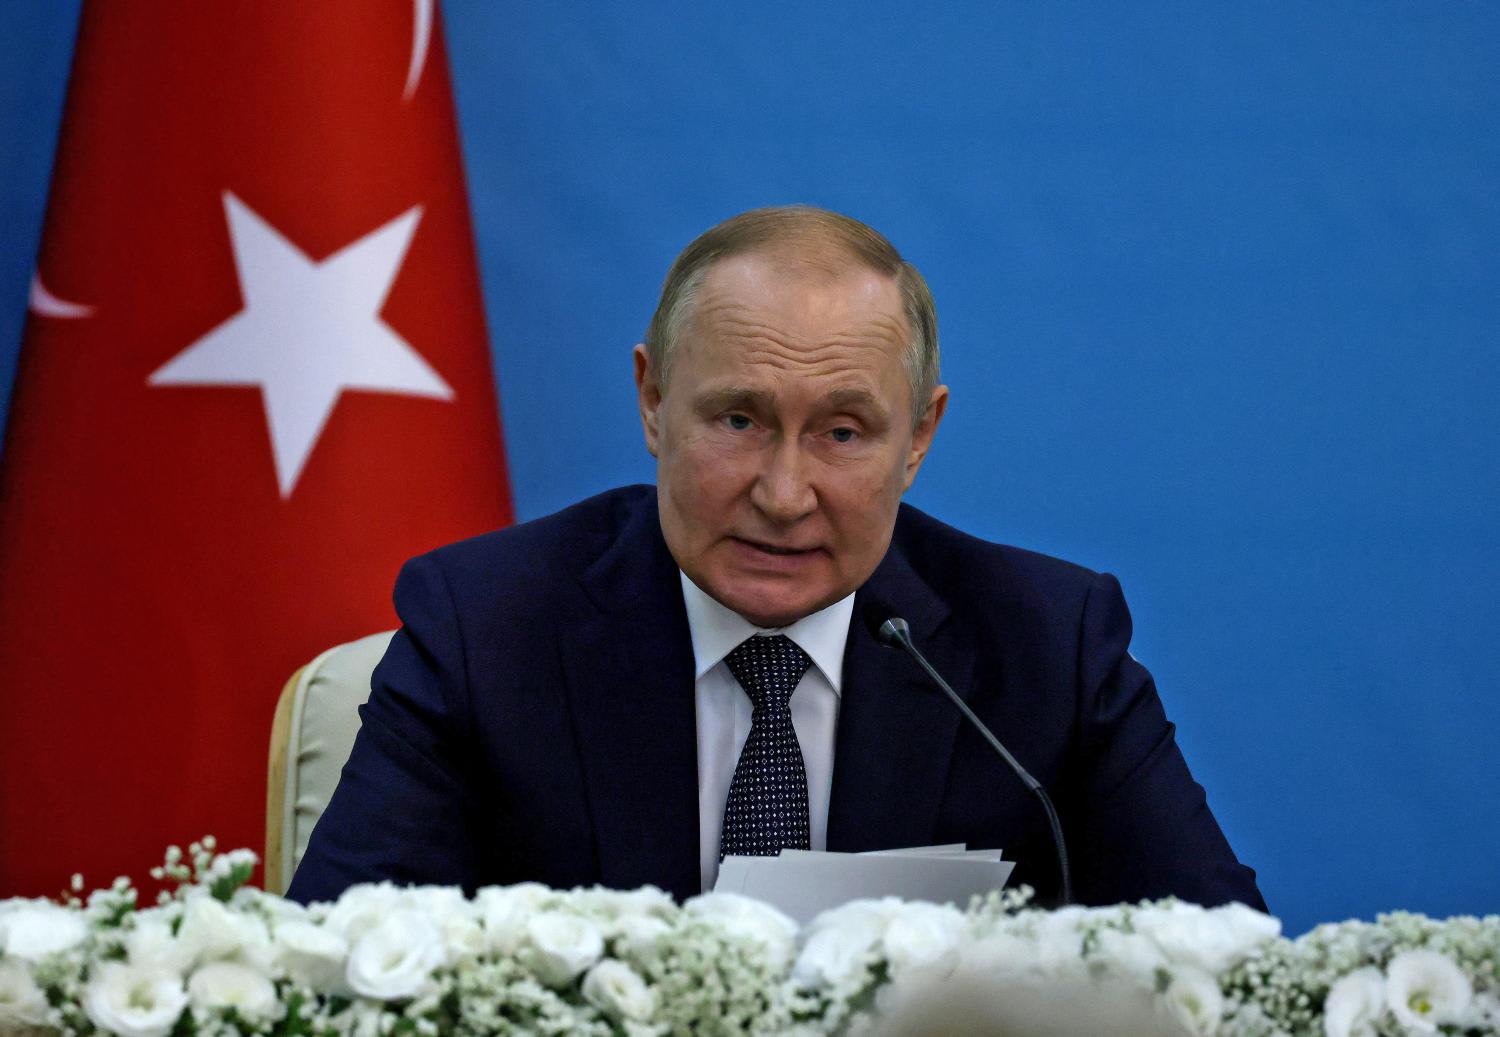 Russian President Vladimir Putin speaks during a joint press conference with his Iranian and Turkish counterparts following their summit in Tehran on July 19, 2022.